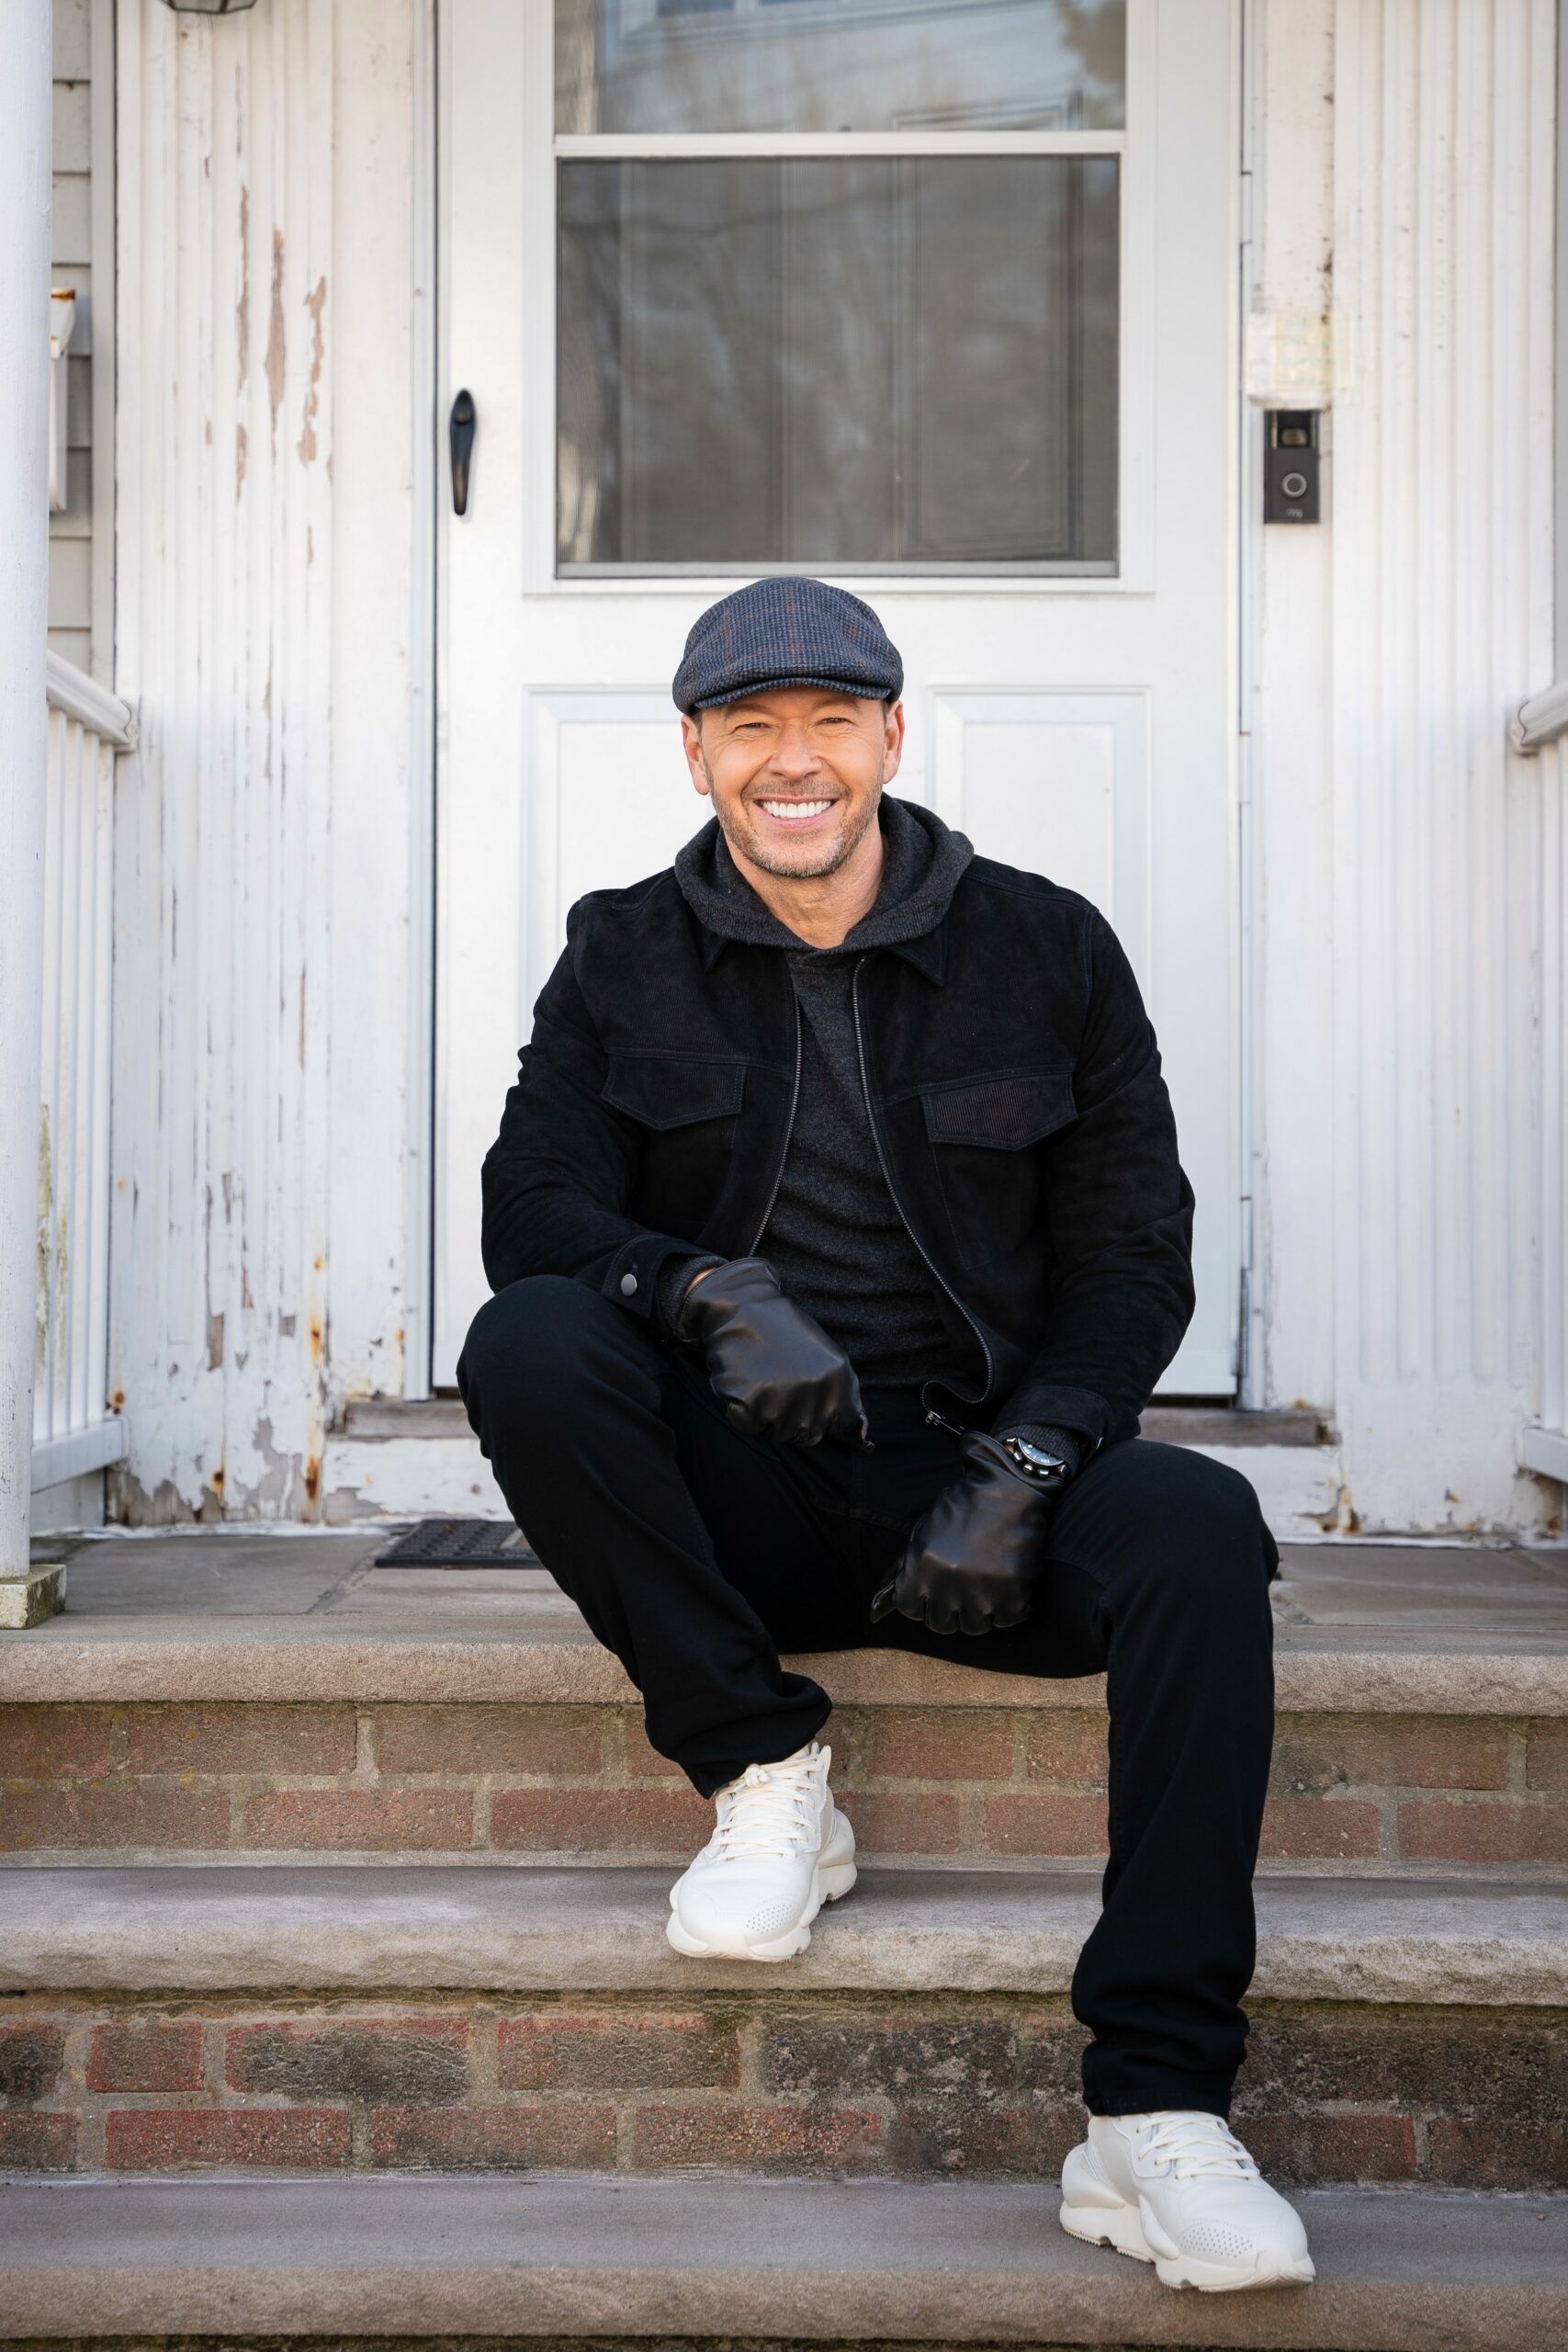 Donnie Wahlberg teams up with Clean Fuels Alliance America to drive awareness for Bioheat fuel